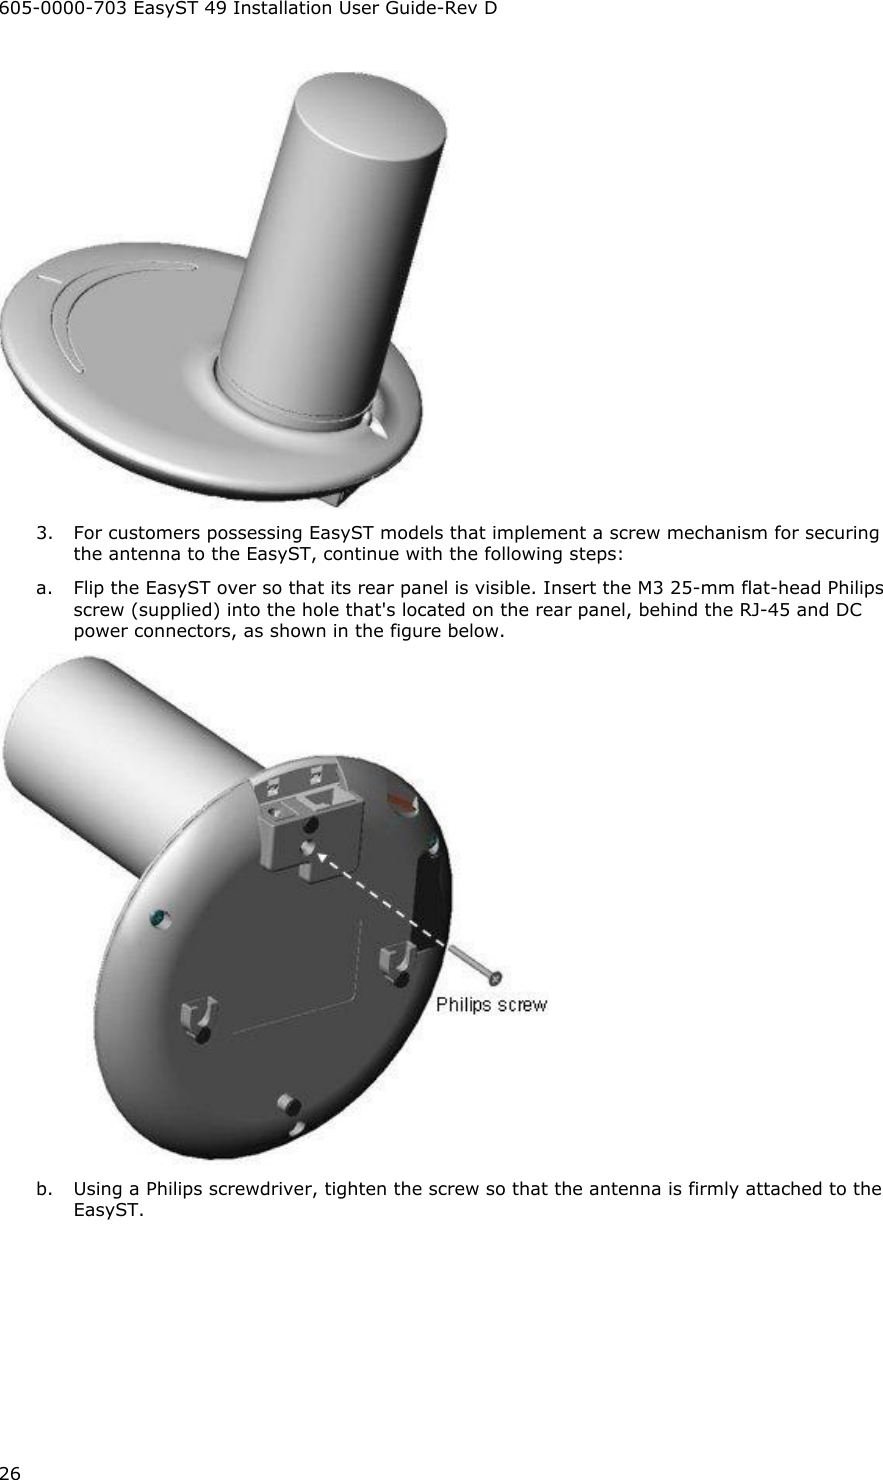 605-0000-703 EasyST 49 Installation User Guide-Rev D 26  3.  For customers possessing EasyST models that implement a screw mechanism for securing the antenna to the EasyST, continue with the following steps: a.  Flip the EasyST over so that its rear panel is visible. Insert the M3 25-mm flat-head Philips screw (supplied) into the hole that&apos;s located on the rear panel, behind the RJ-45 and DC power connectors, as shown in the figure below.  b.  Using a Philips screwdriver, tighten the screw so that the antenna is firmly attached to the EasyST. 